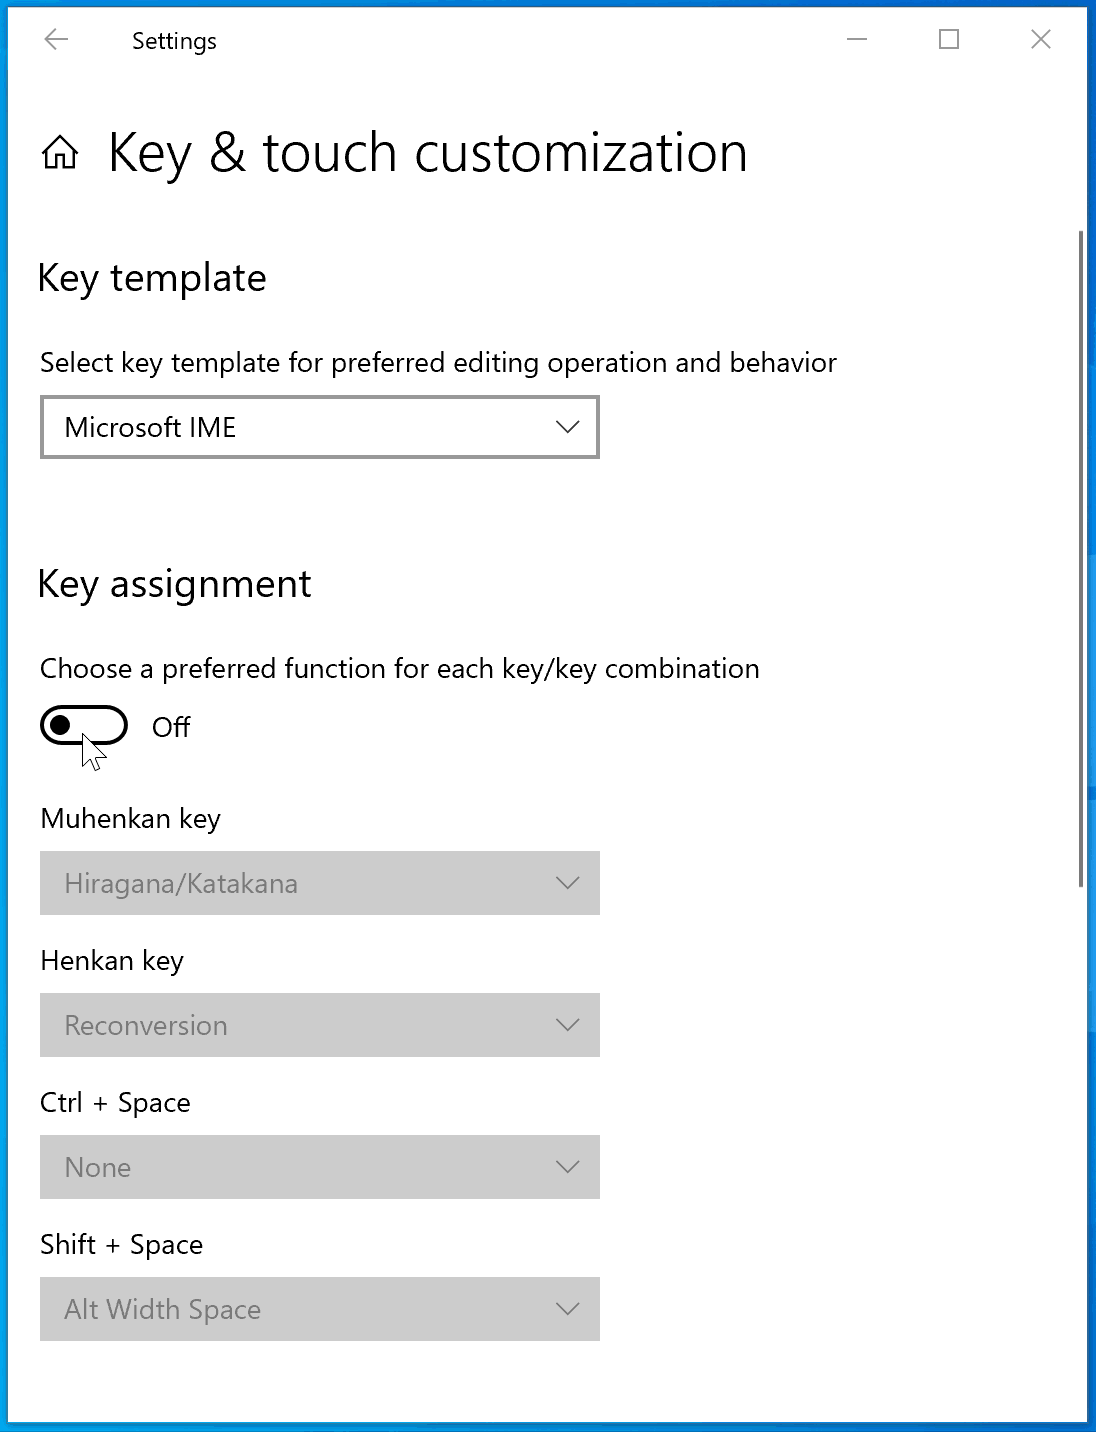 Showing the improved key assignment settings in the Key & touch customization on the Japanese IME settings.